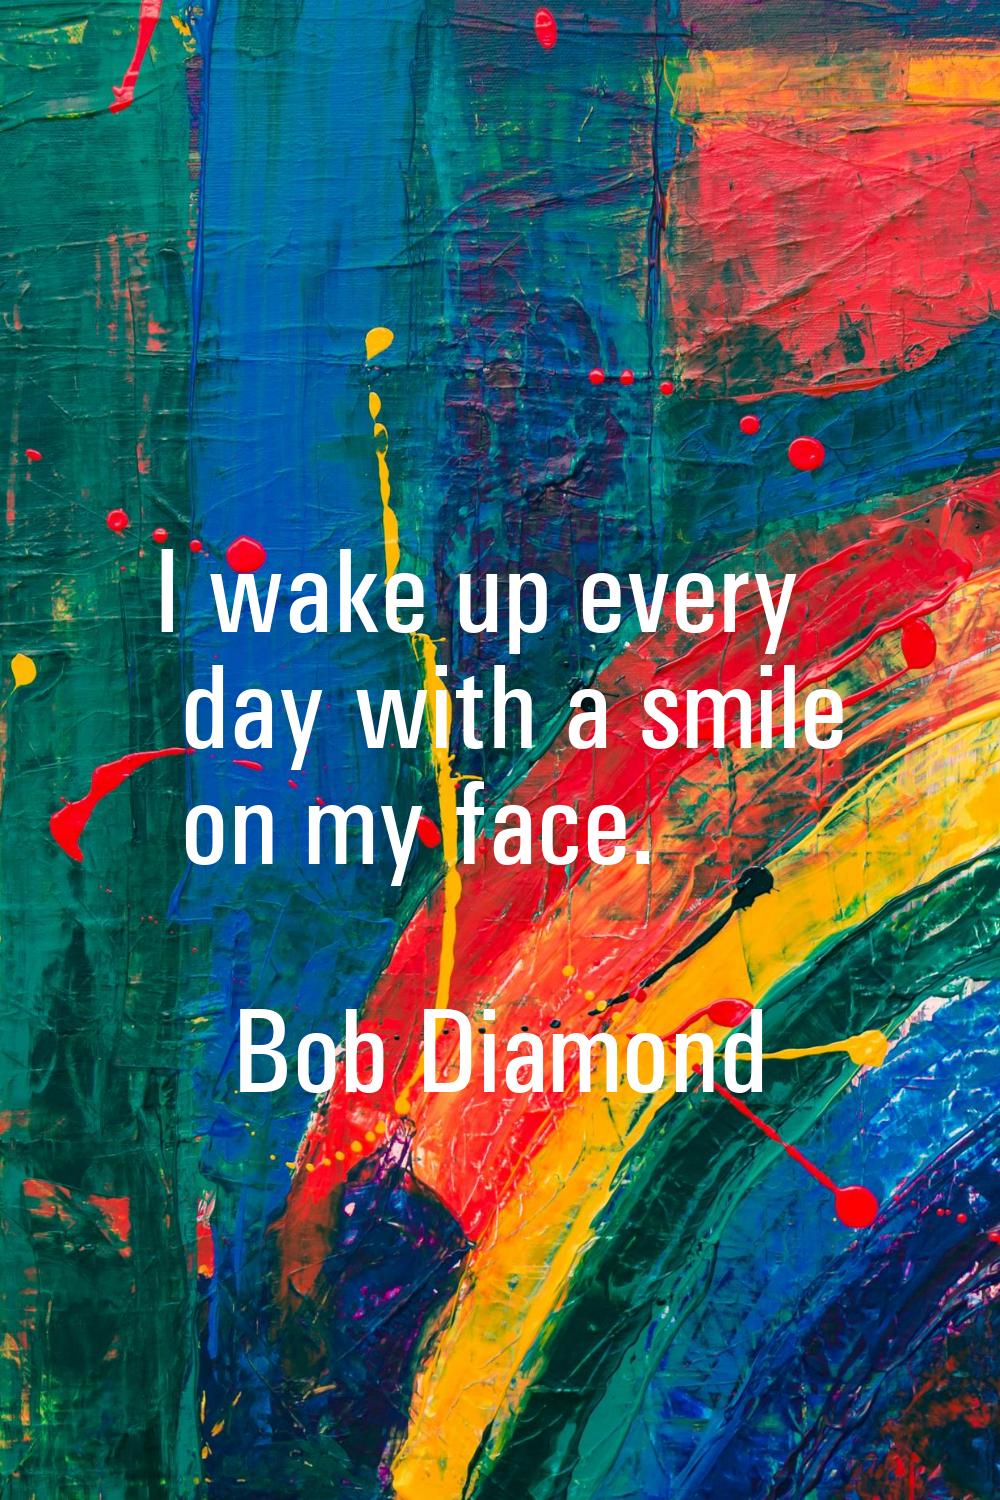 I wake up every day with a smile on my face.